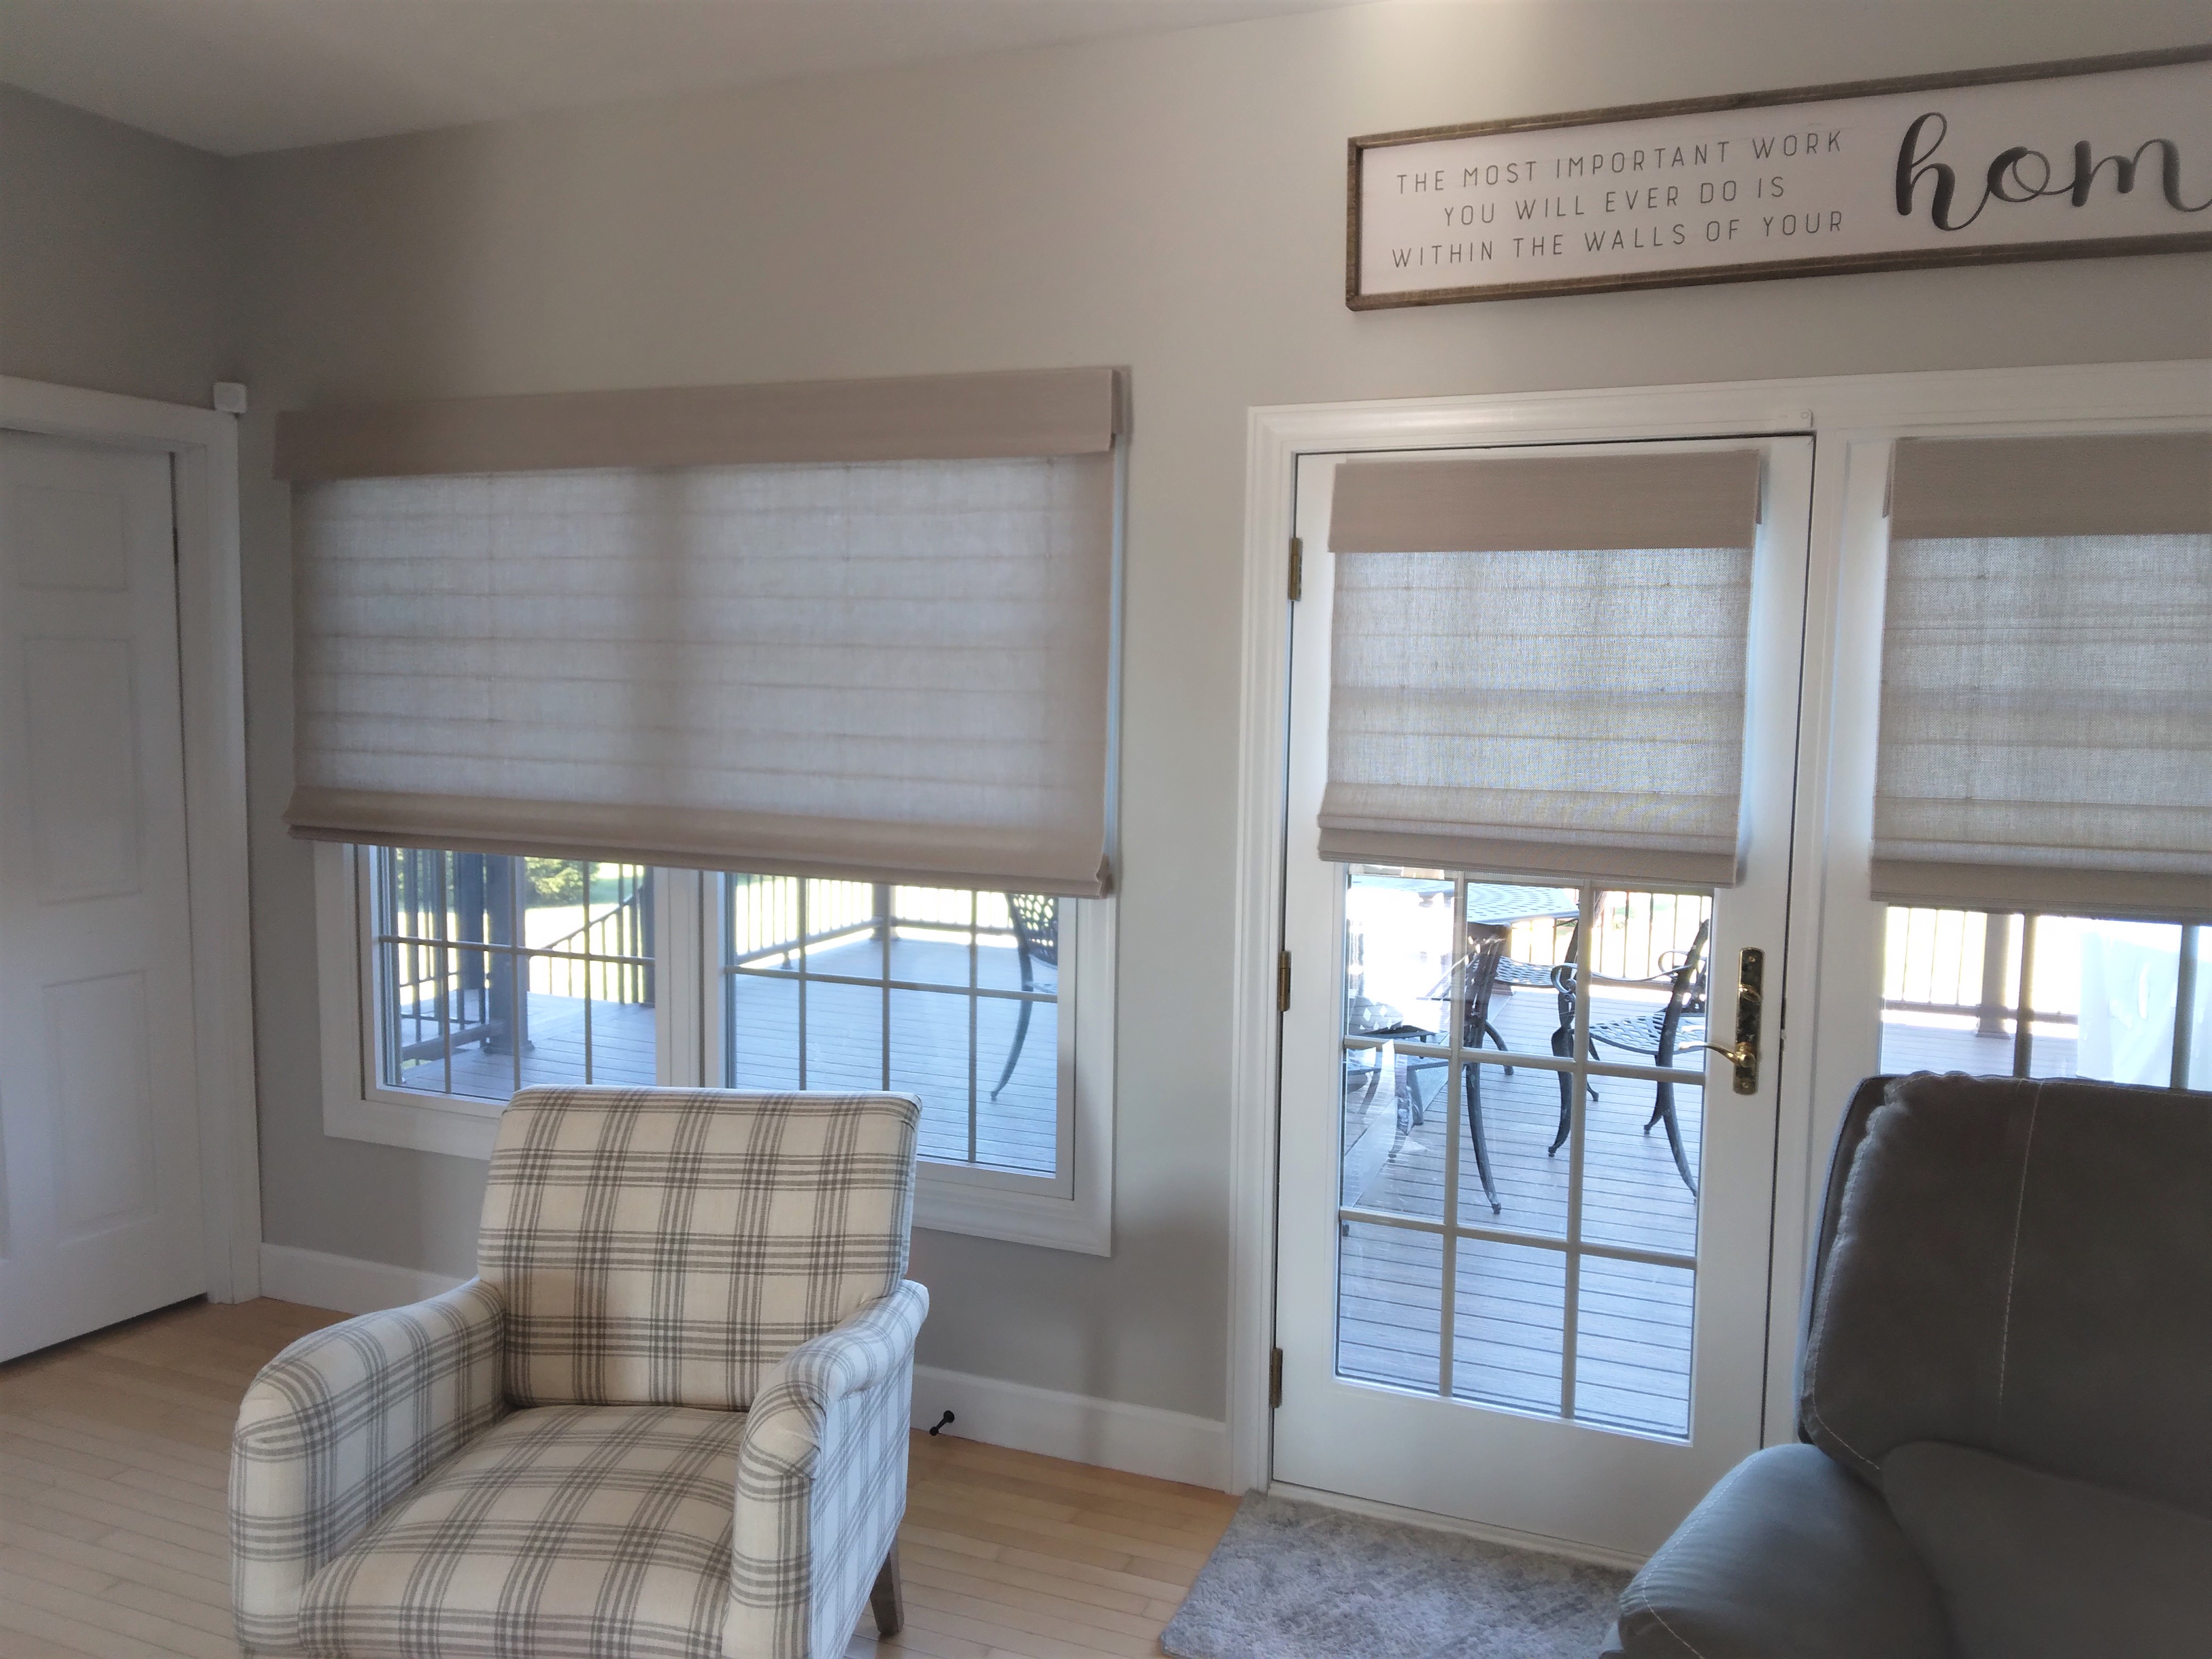 Light filtering natural shades in Springfield Illinois living room.  BudgetBlinds  WindowCoverings  NaturalShades  WovenWoodShades  SpringfieldIllinois